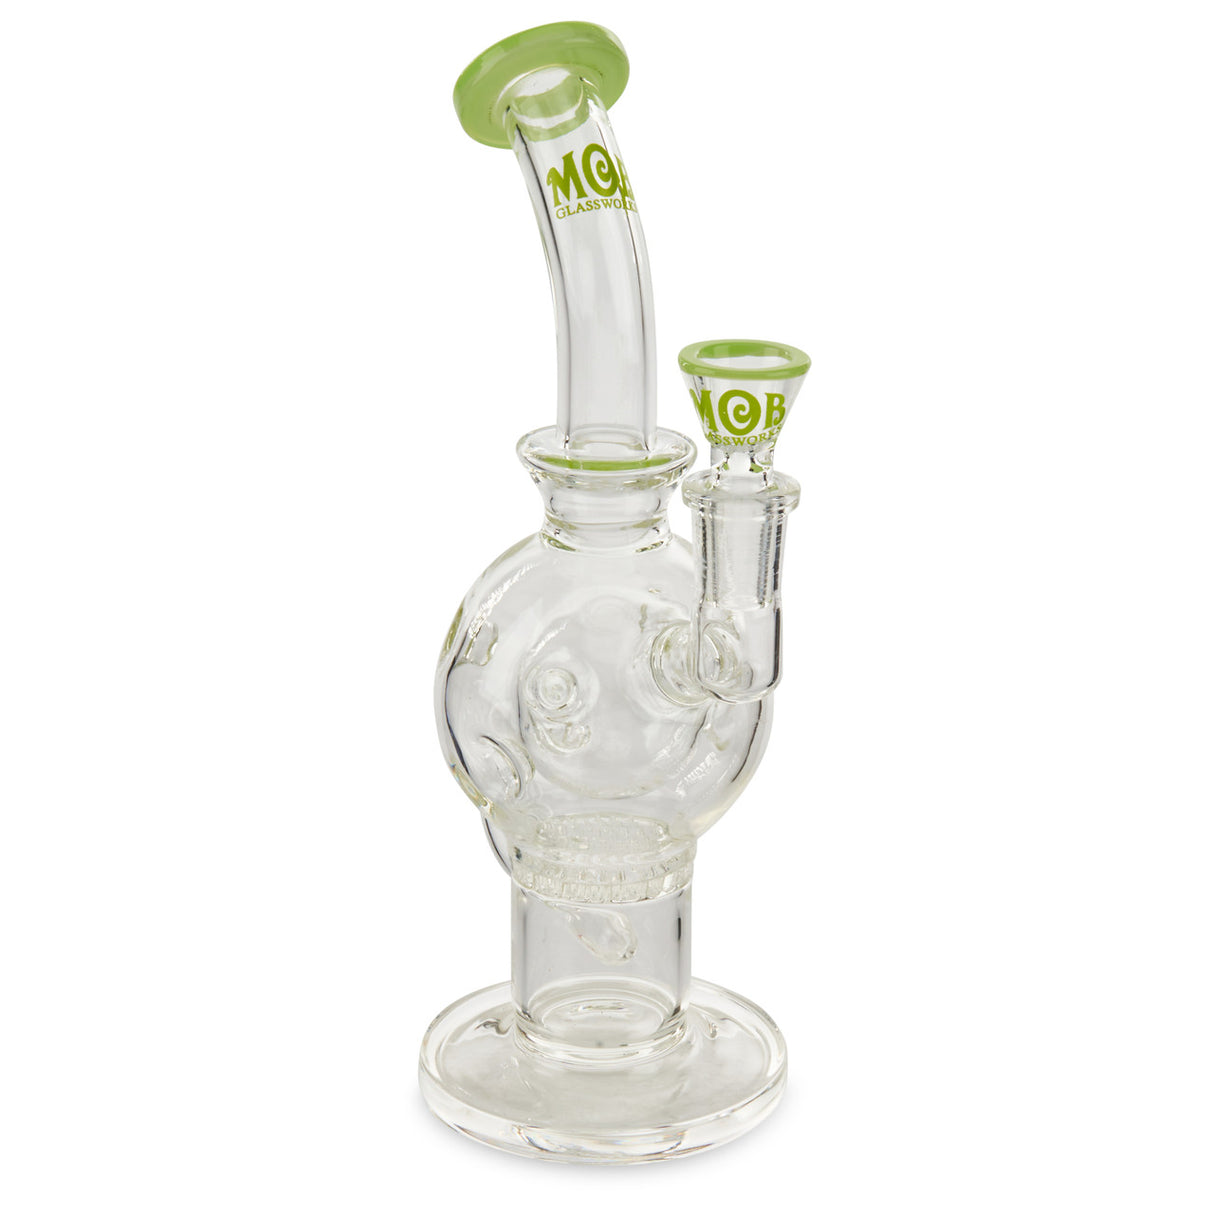 Green MOB Glass Ball Rig For Dabs